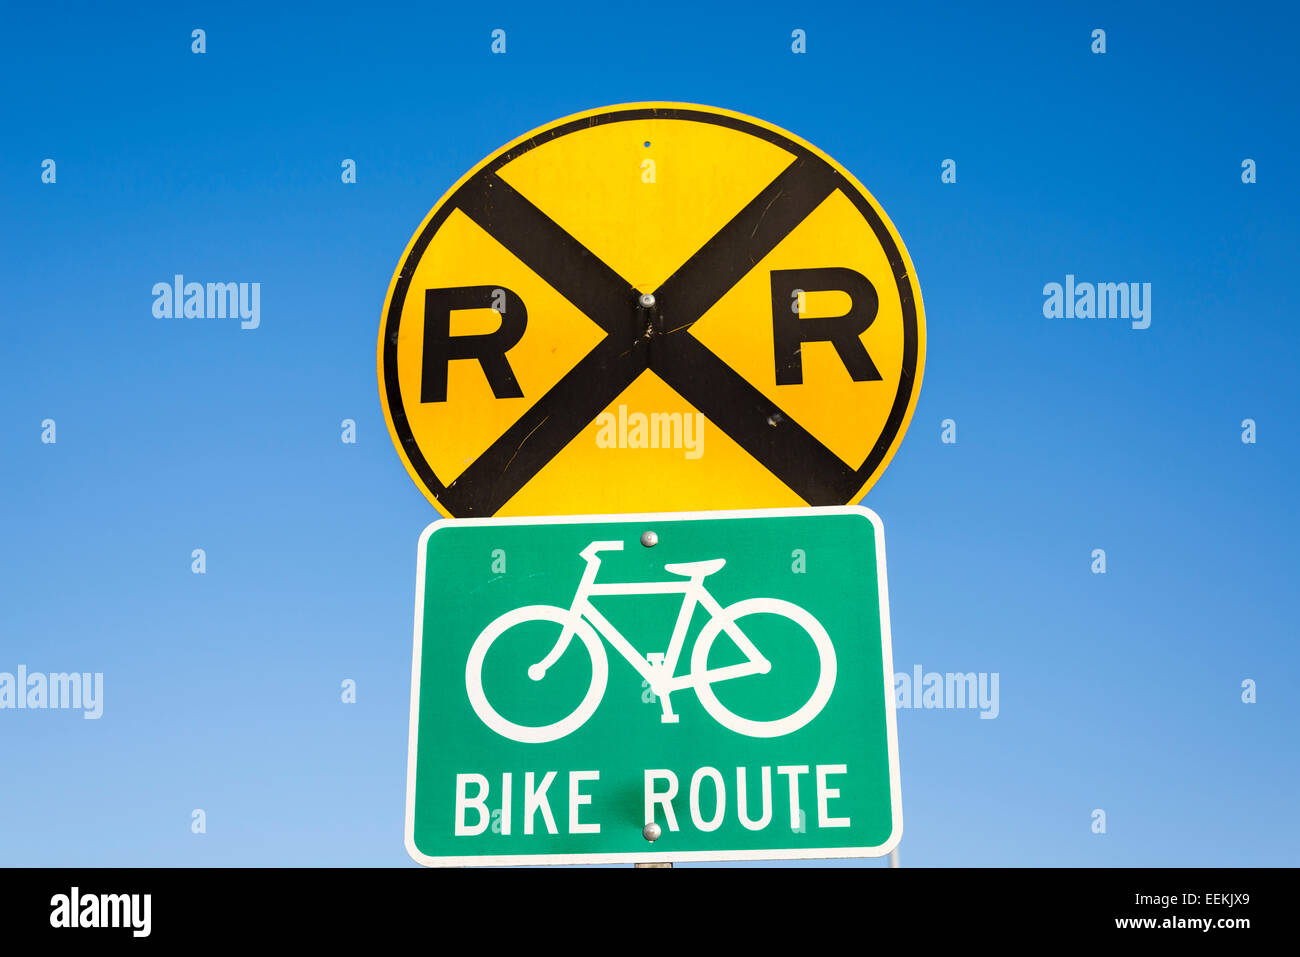 Railroad crossing warning sign, and bike route sign. Stock Photo